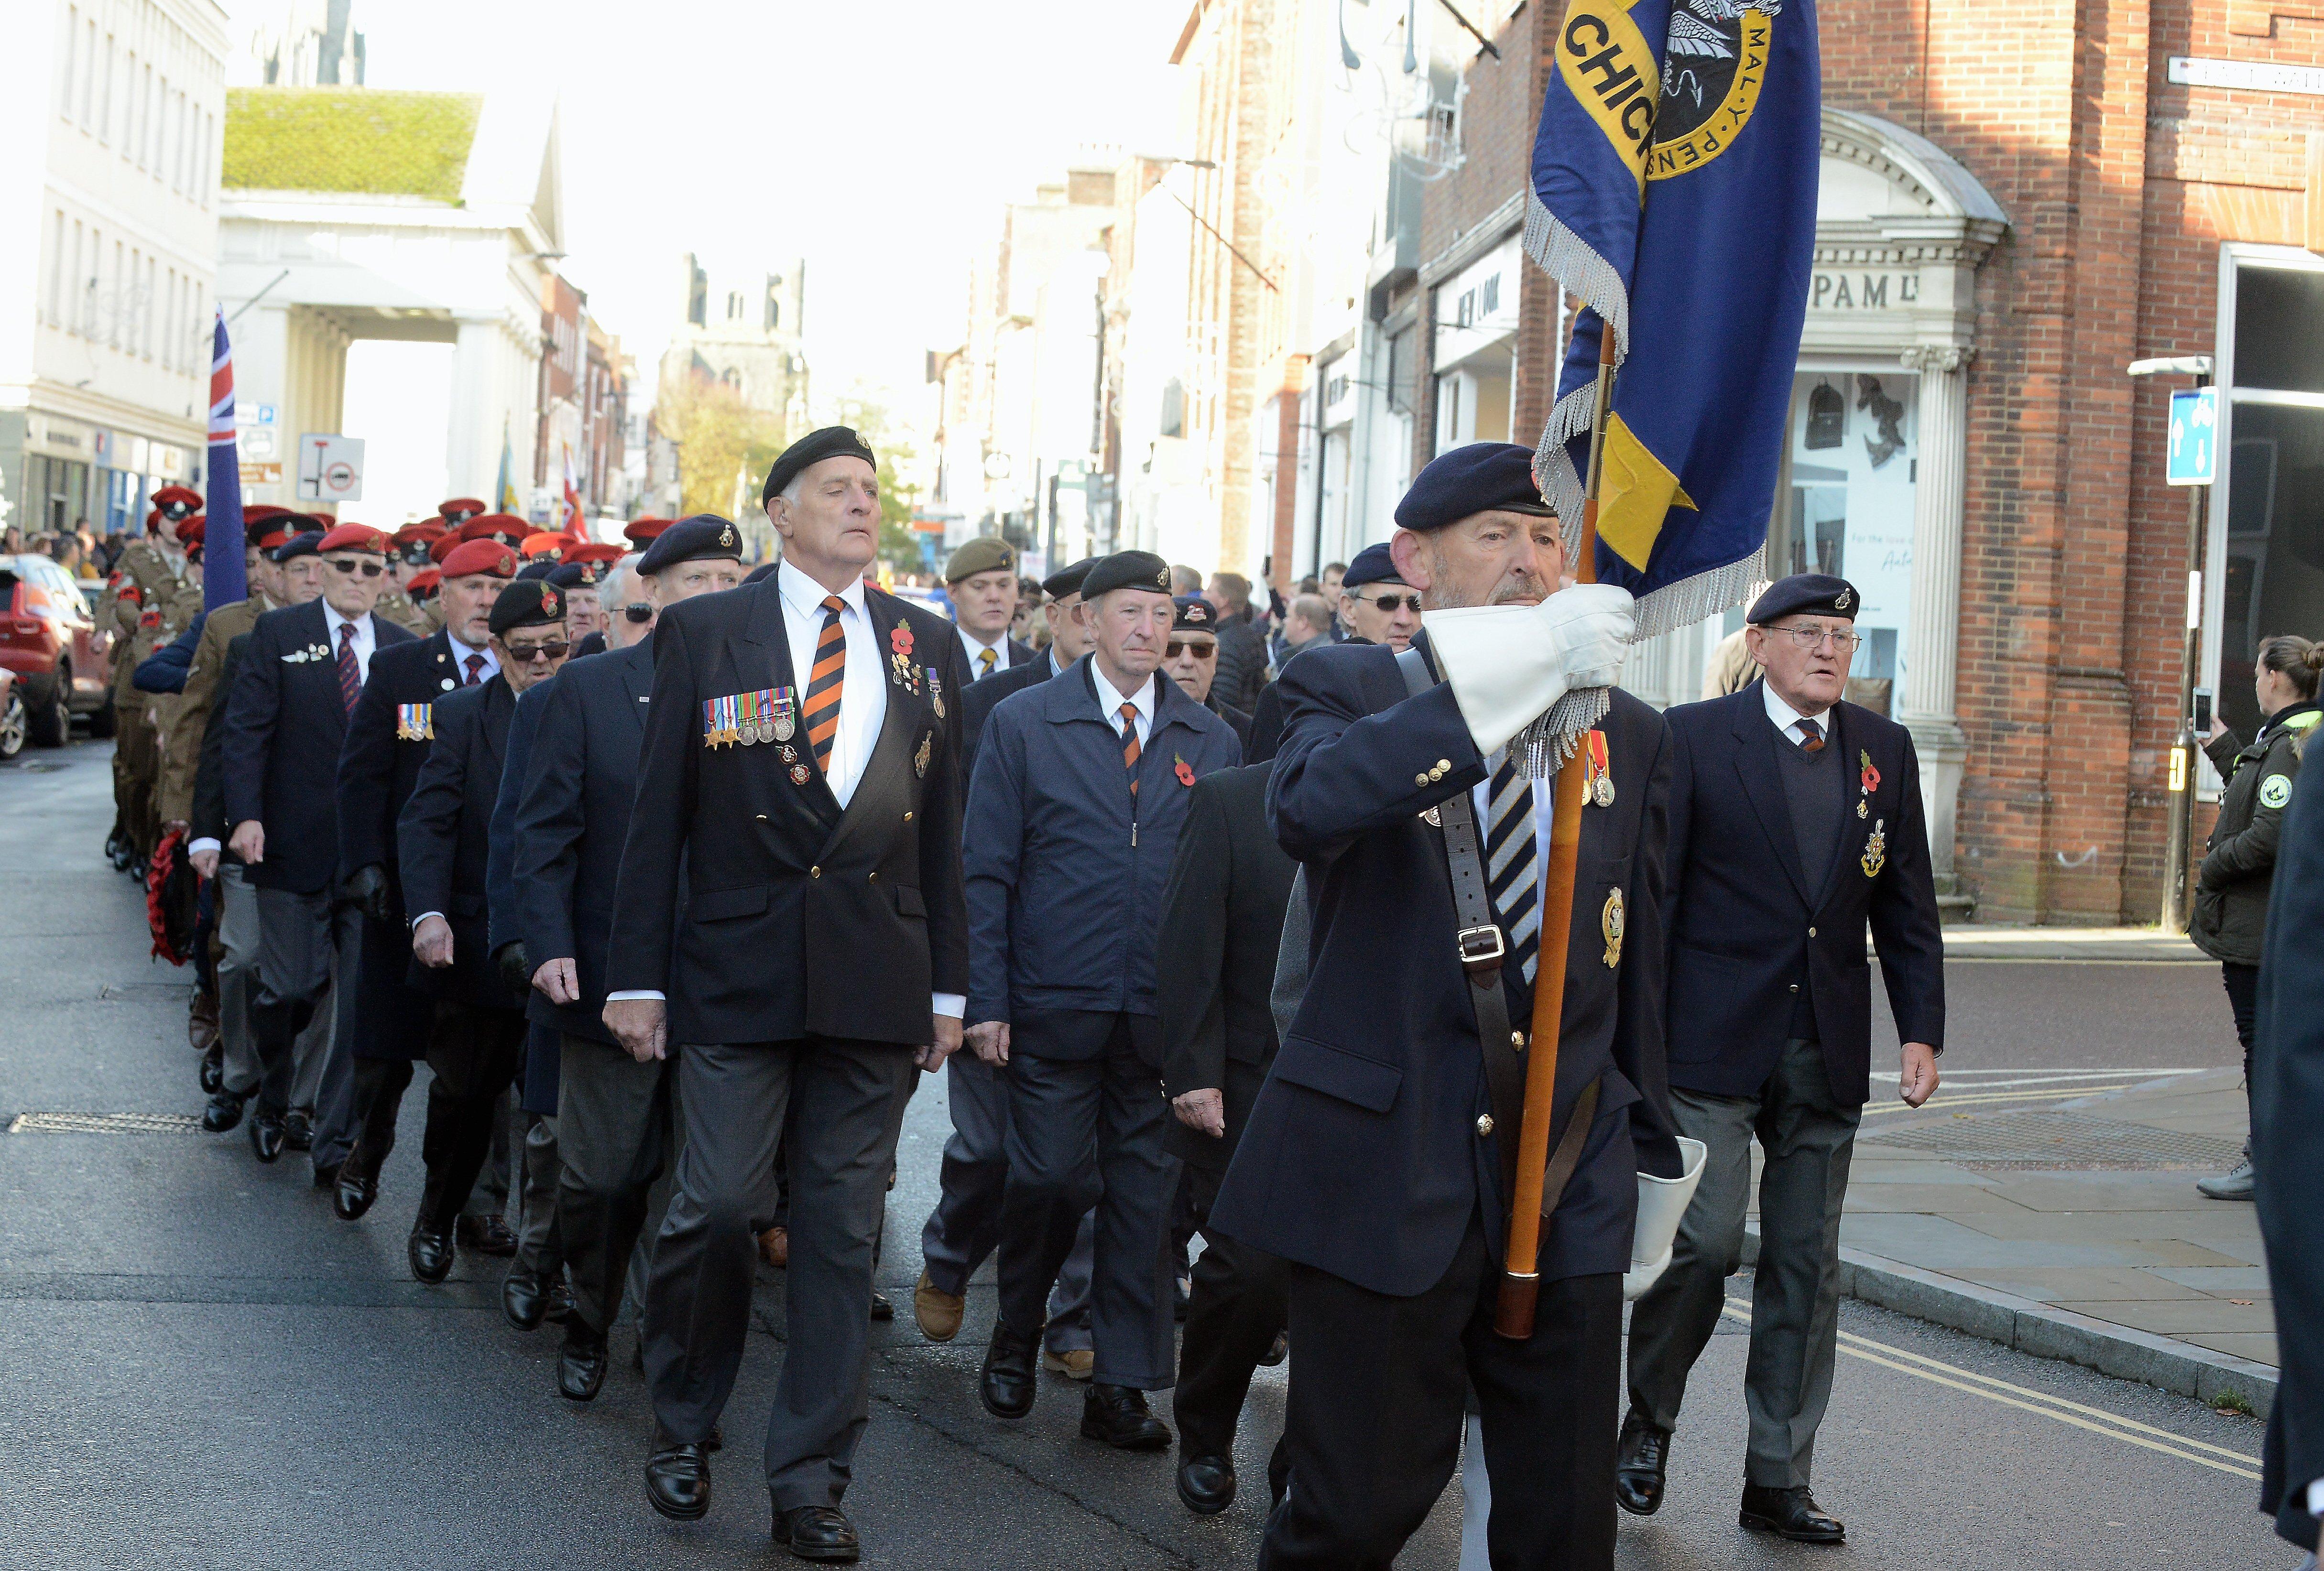 ks190610-6 Chichester Remembrance phot kate SUS-191011-195917008